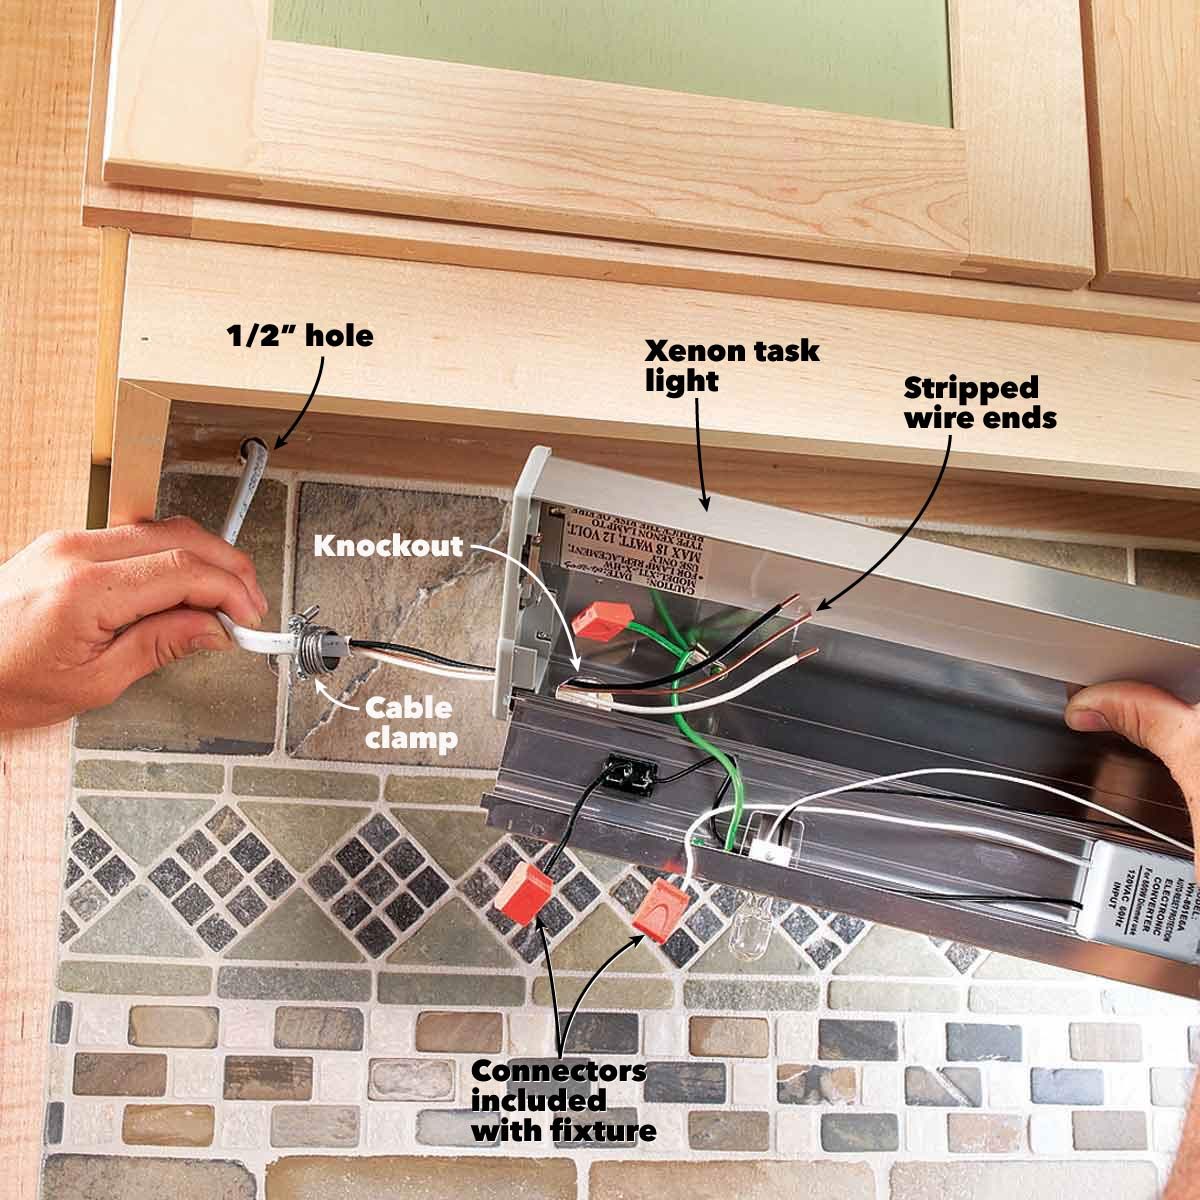 How to Install Under CabiLighting in Your Kitchen (DIY)